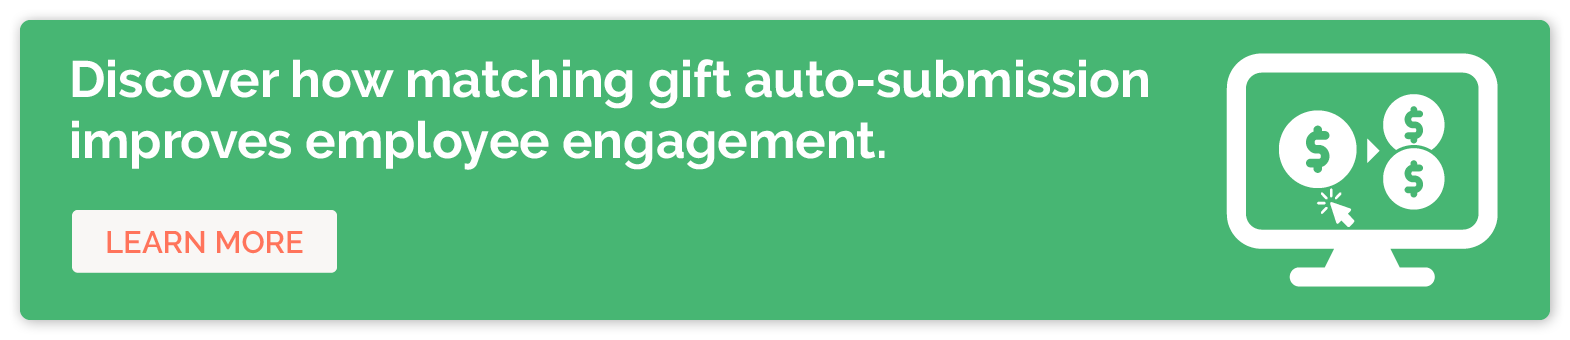 Click to learn more about matching gift auto-submission and how it improves employee engagement.